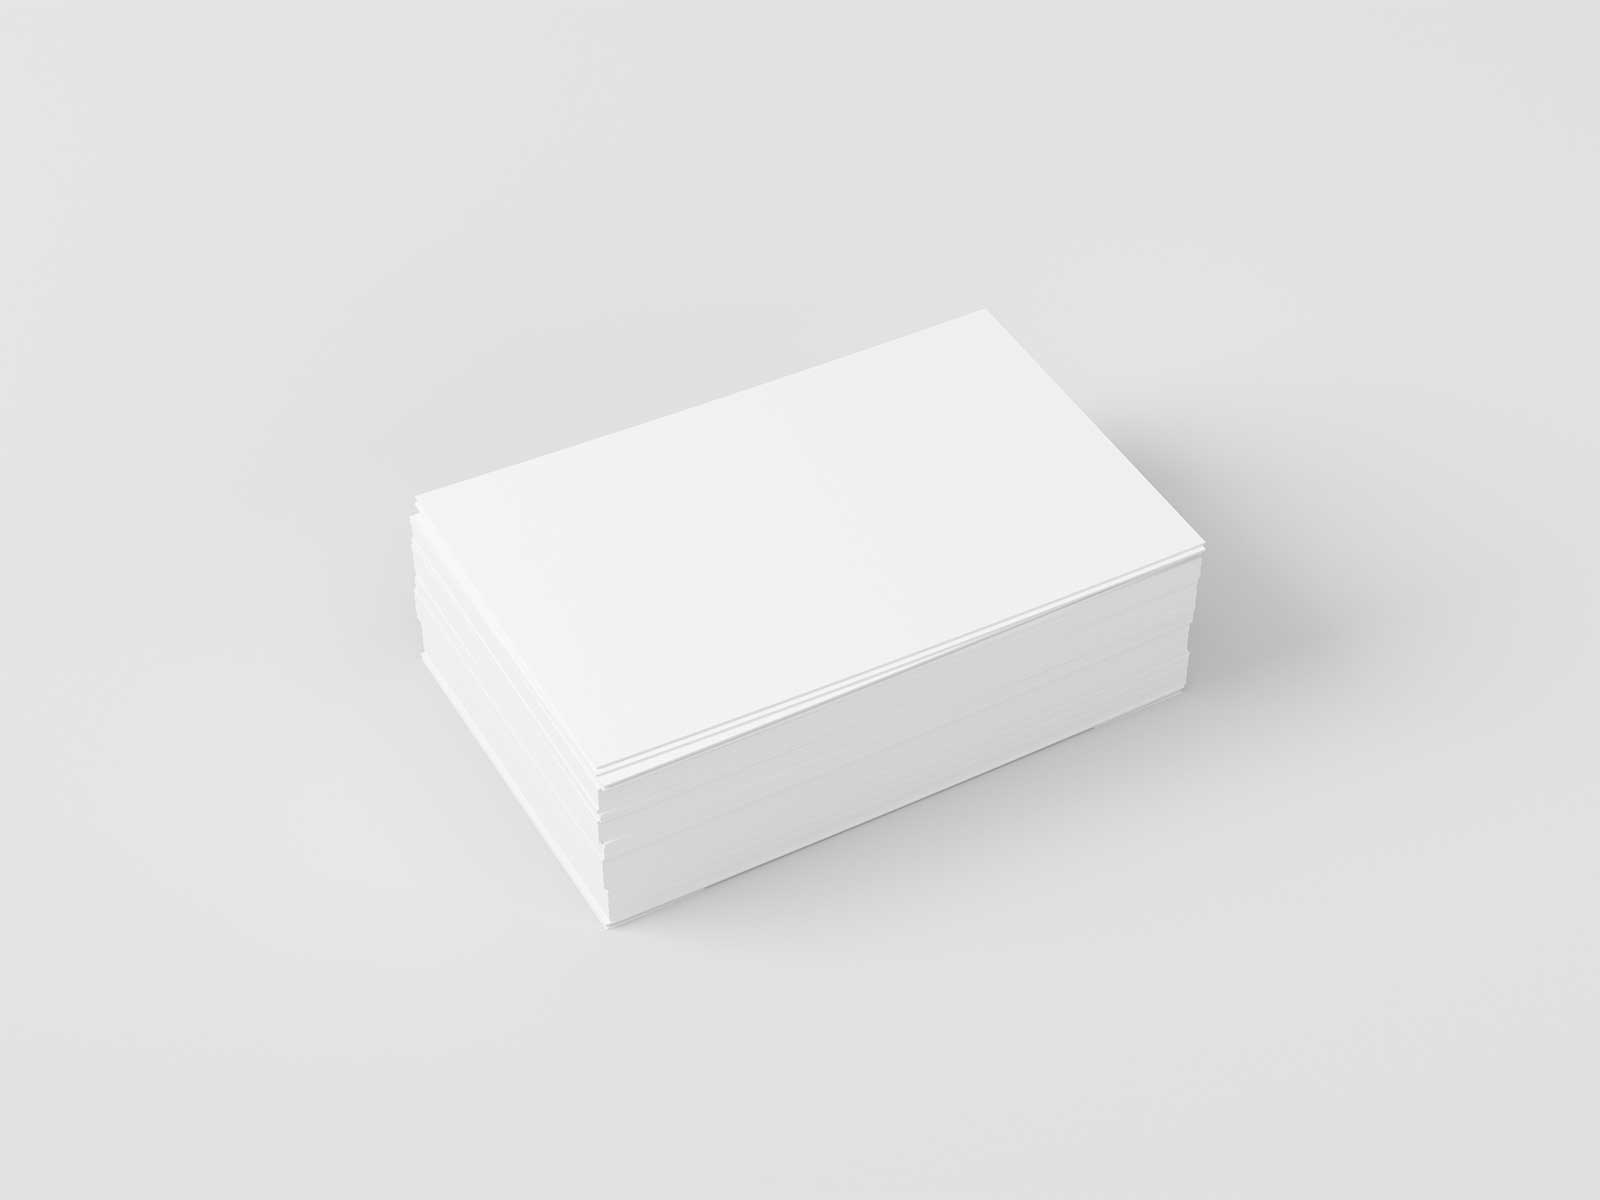 Business Card Free Mockups: Showcase Your Professional Identity!